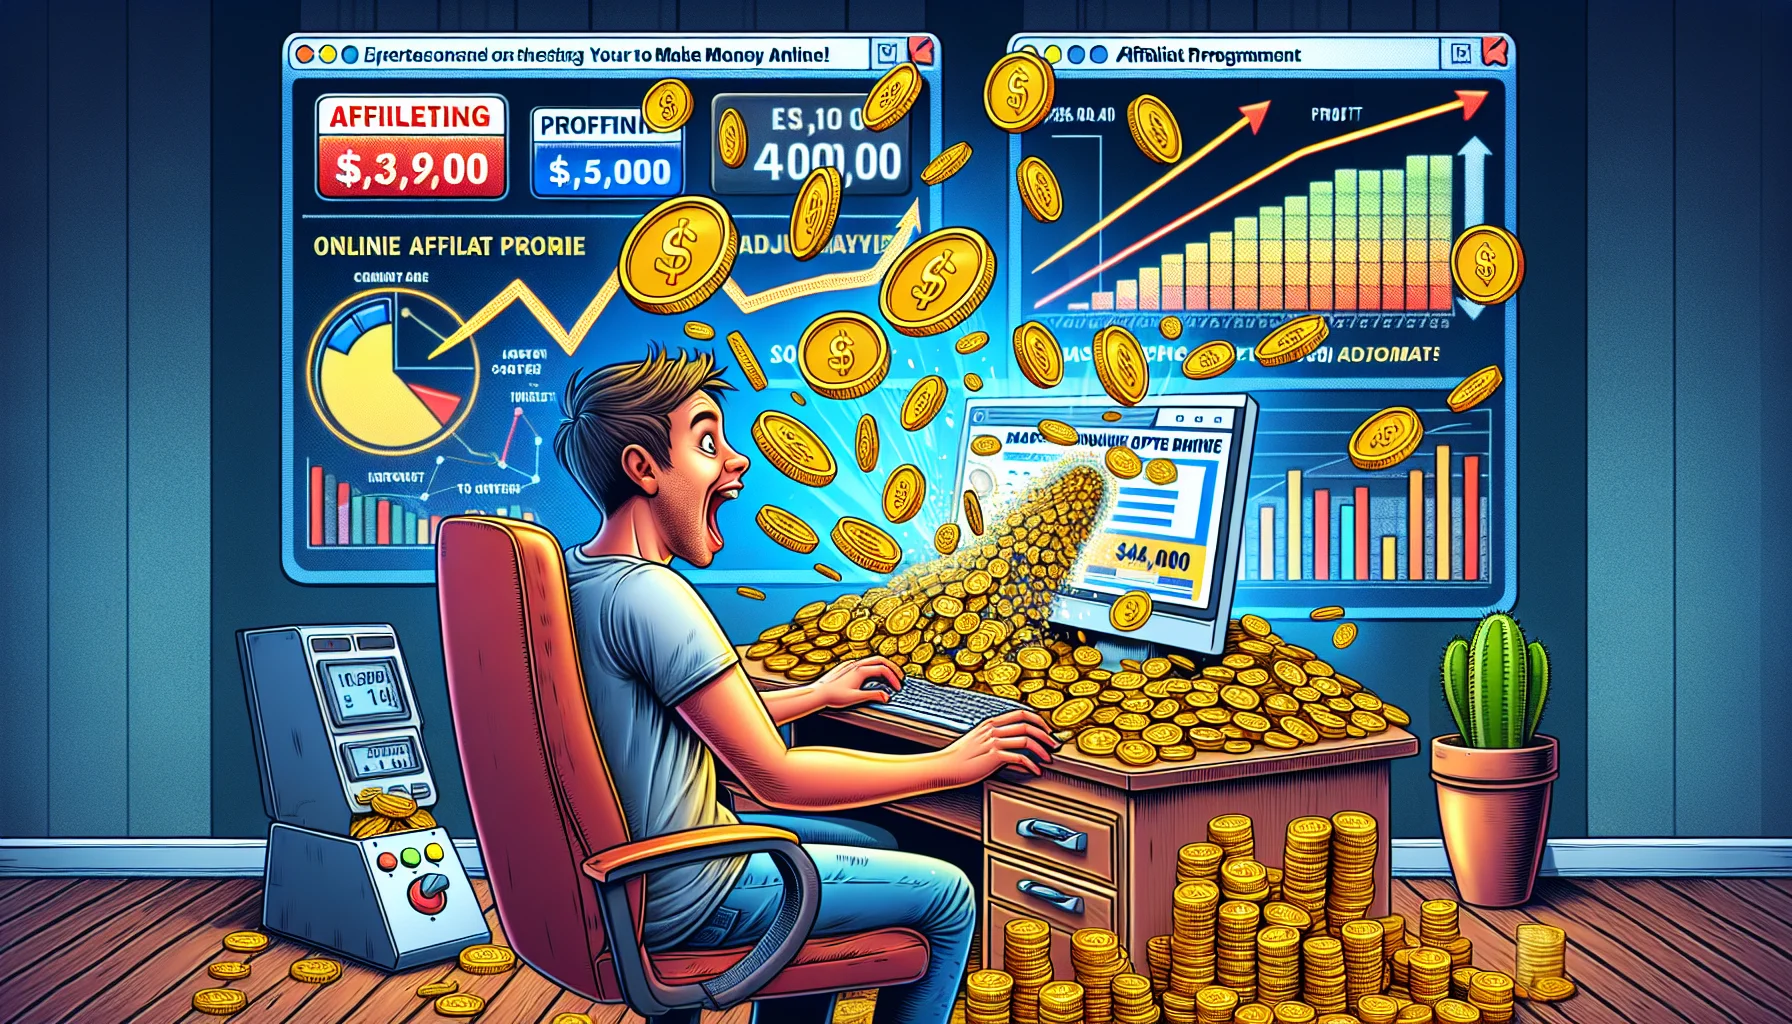 Generate an image in a realistic style, showing a humorous scenario related to an online affiliate program, depicted in a way that entices users about the possibility of making money online. The scene features a person sitting in front of their computer at home, with an excited expression, as digital coins start to overflow from the computer screen. Around them, elements of a successful online business are humorously exaggerated: meters showing climbing website traffic, charts with sky-rocketing profit numbers, and a banner overhead proudly declaring the success of the affiliate program.